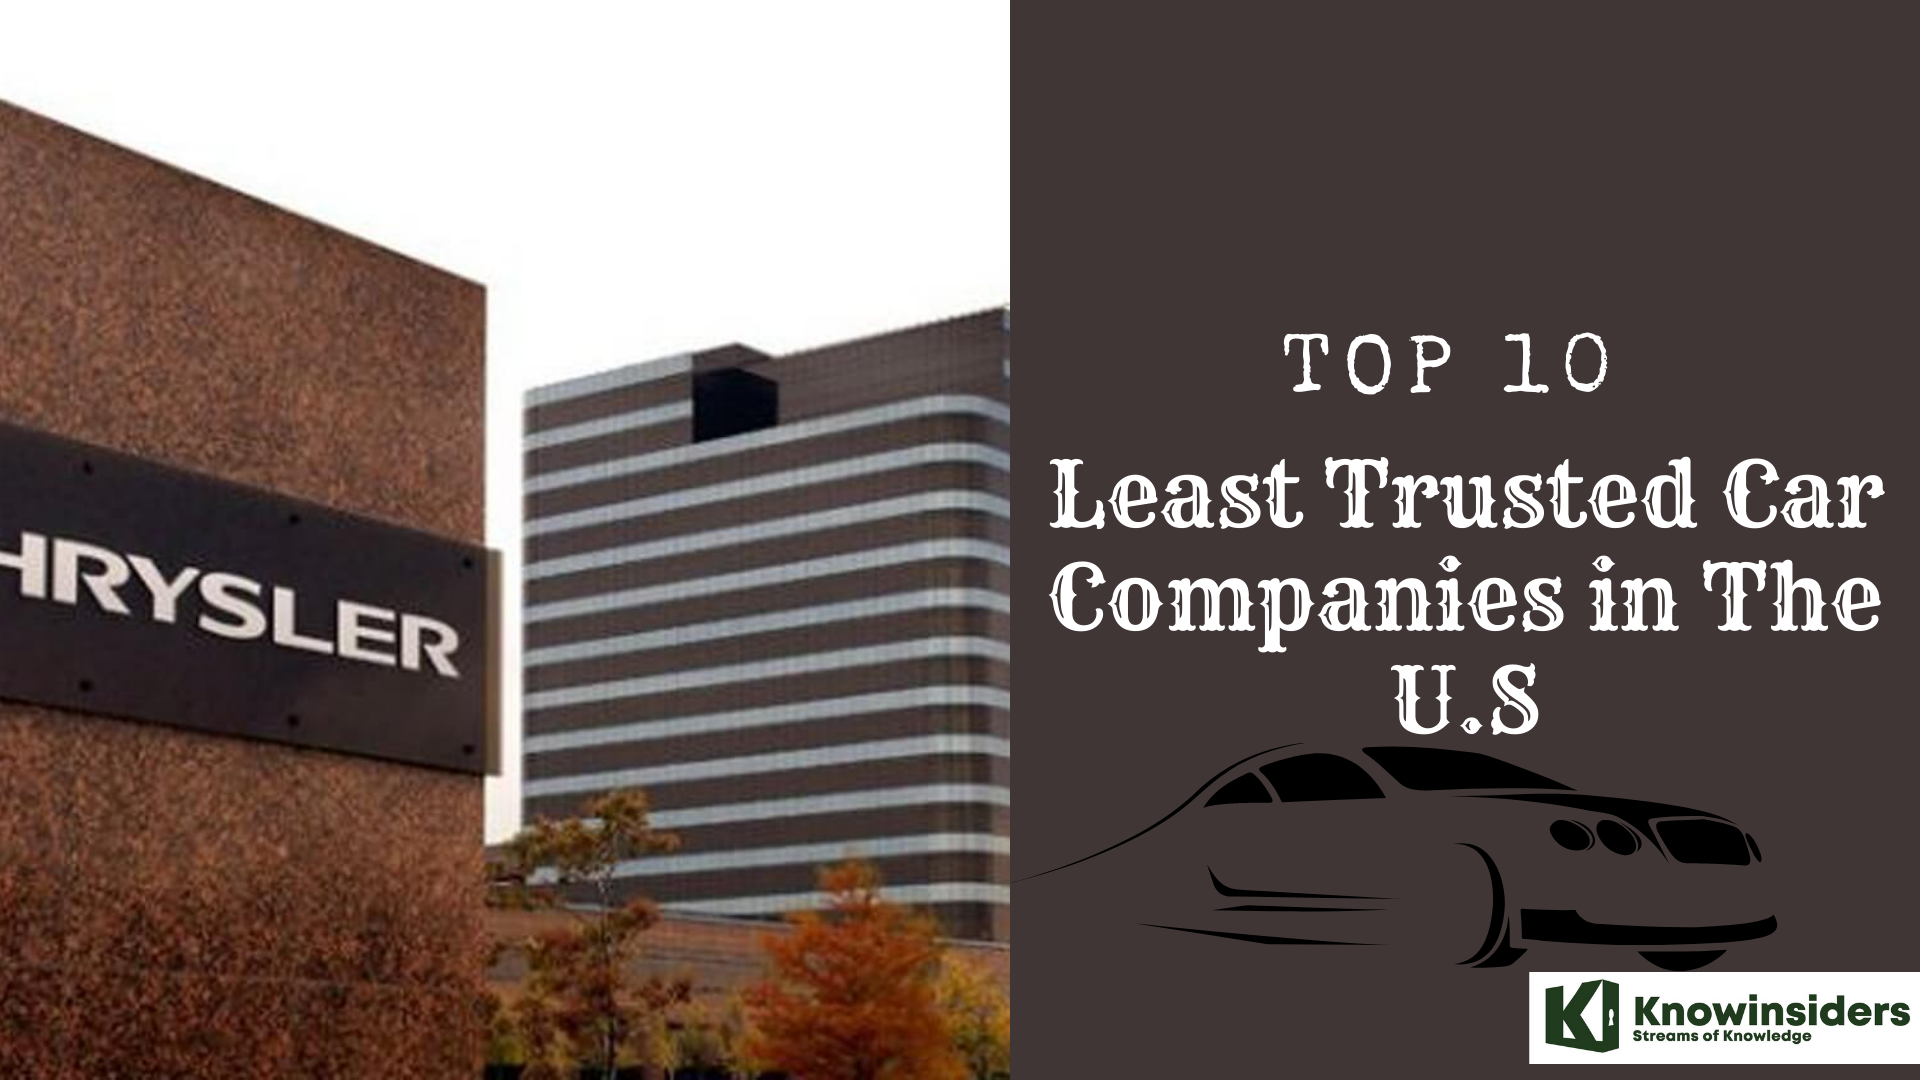 Top 10 least trusted car companies in the US 